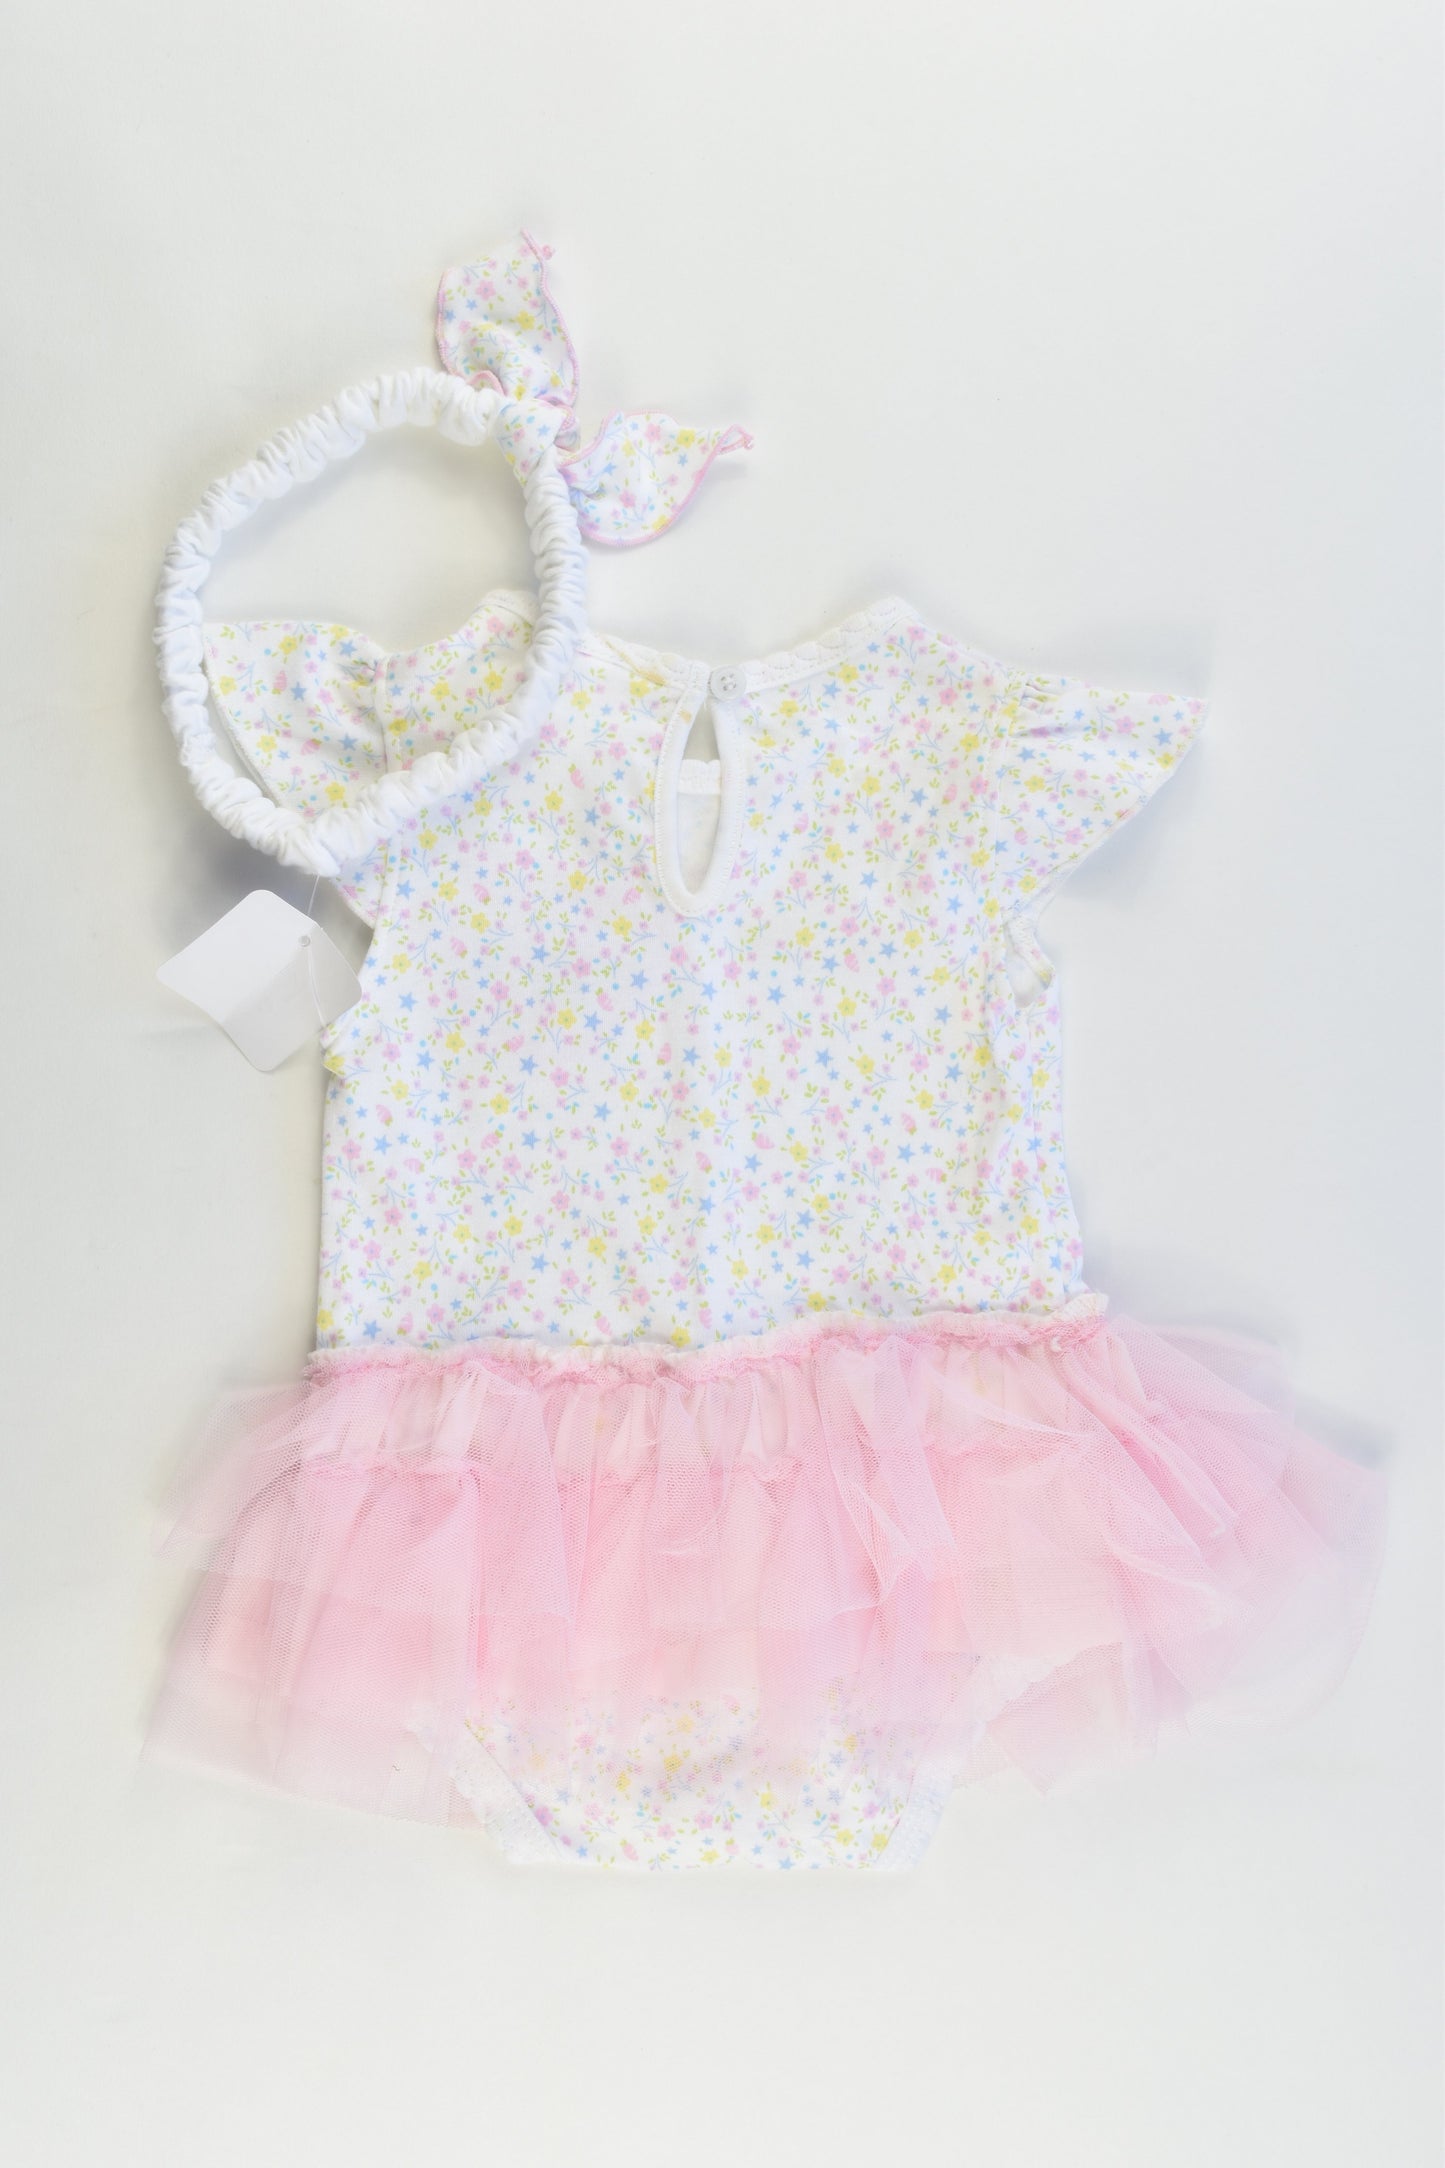 NEW Kids Center Size 0-3 months Bodysuit with Tulle and Matching Headband